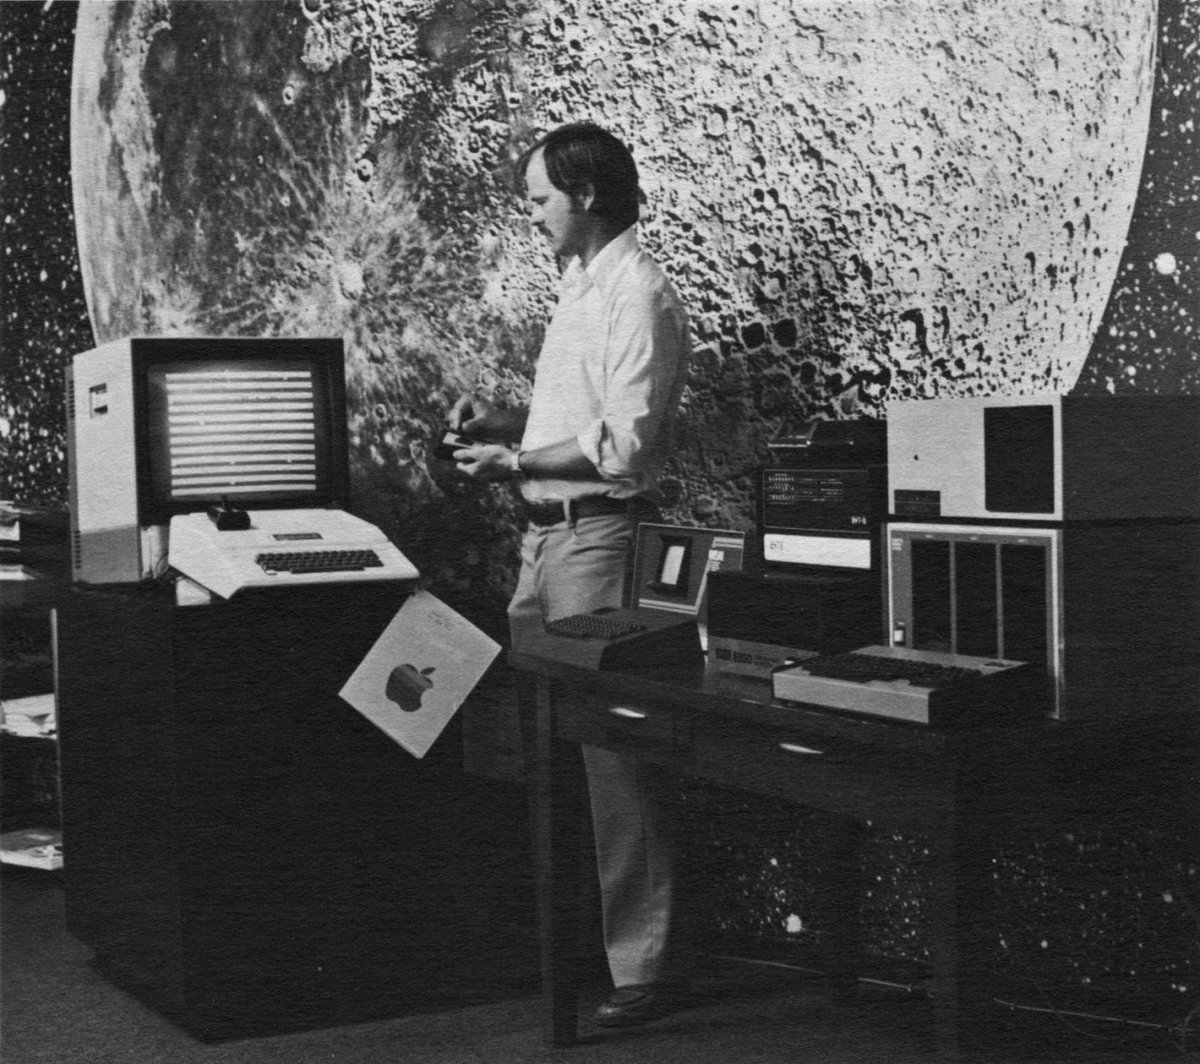 Vancouver’s The Byte Shop (later Byte Computers), 1978. https://vancouvertrueborns.com/post/131586398776/who-sold-the-first-apple-computers-in-canada